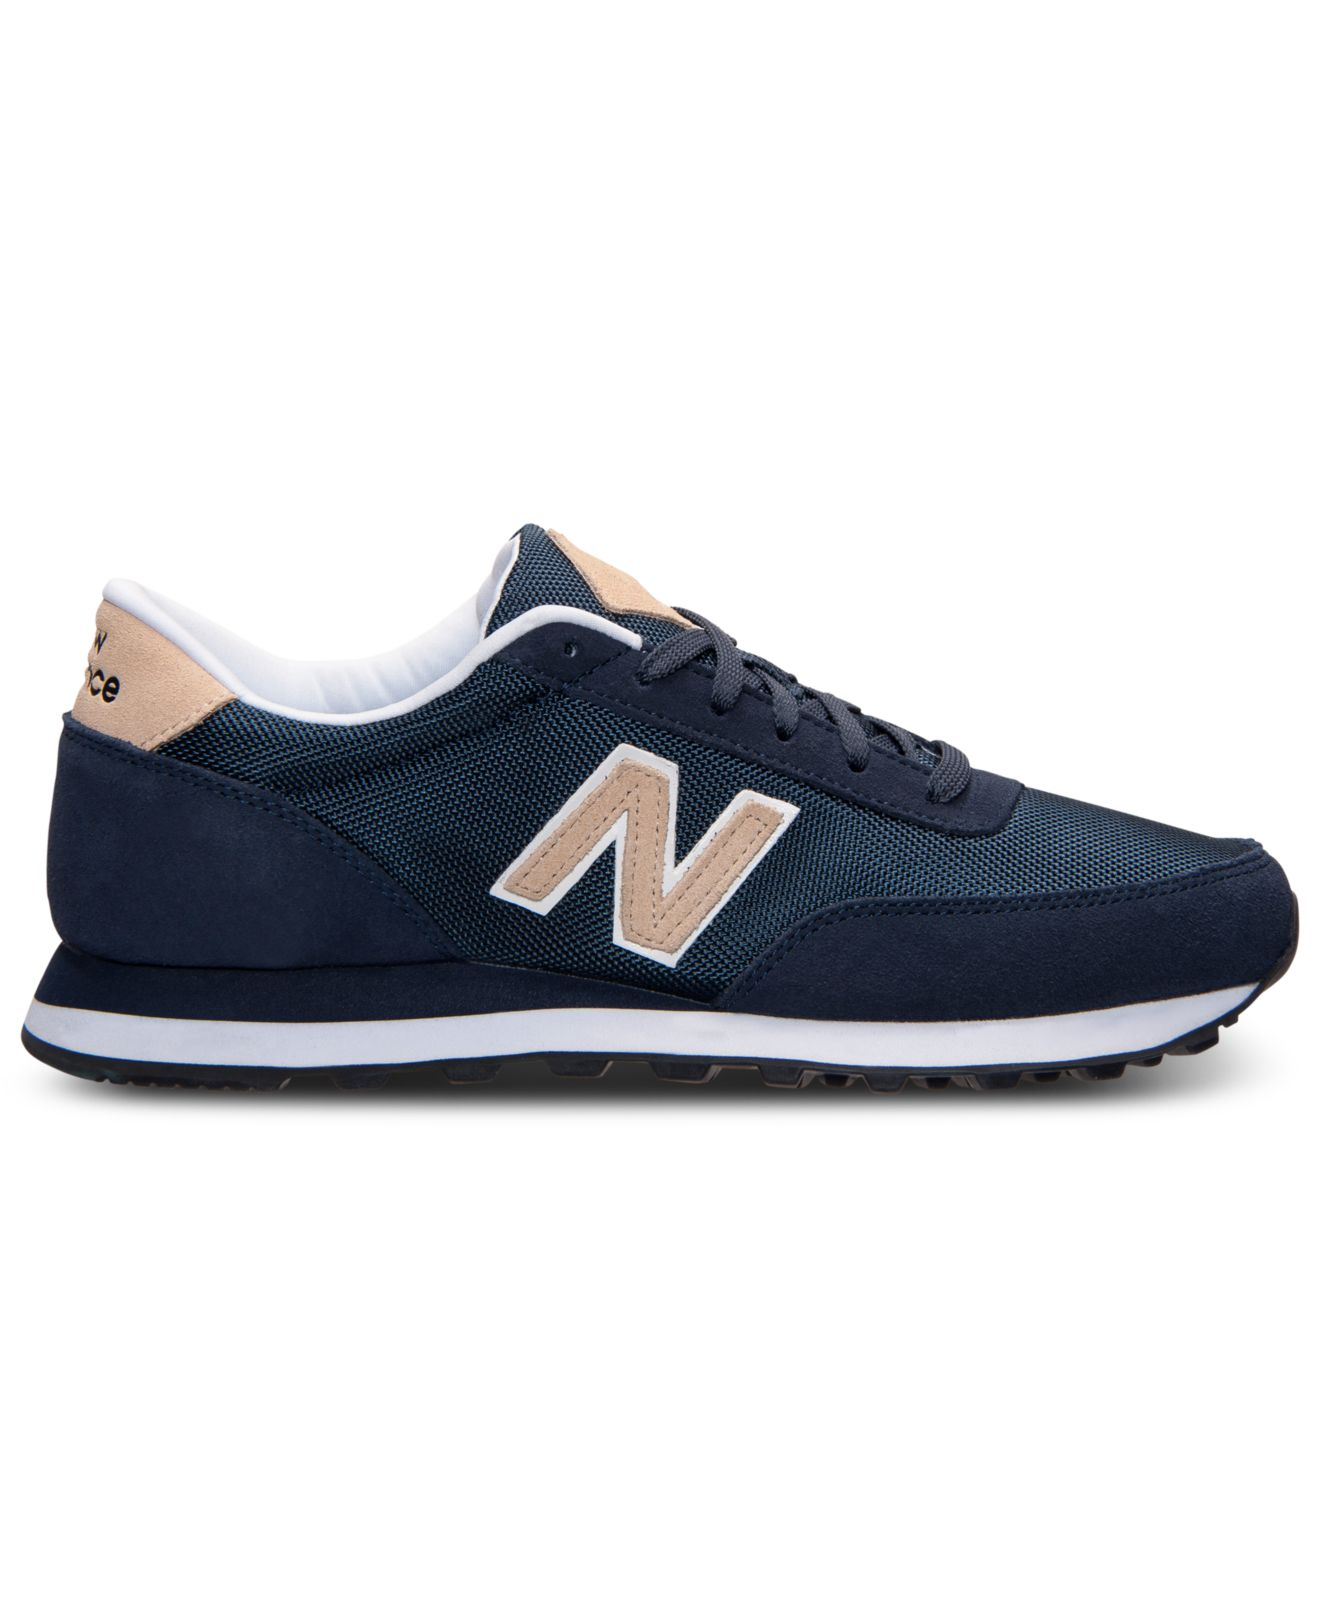 Lyst - New Balance Men'S 501 Sneakers From Finish Line in Blue for Men